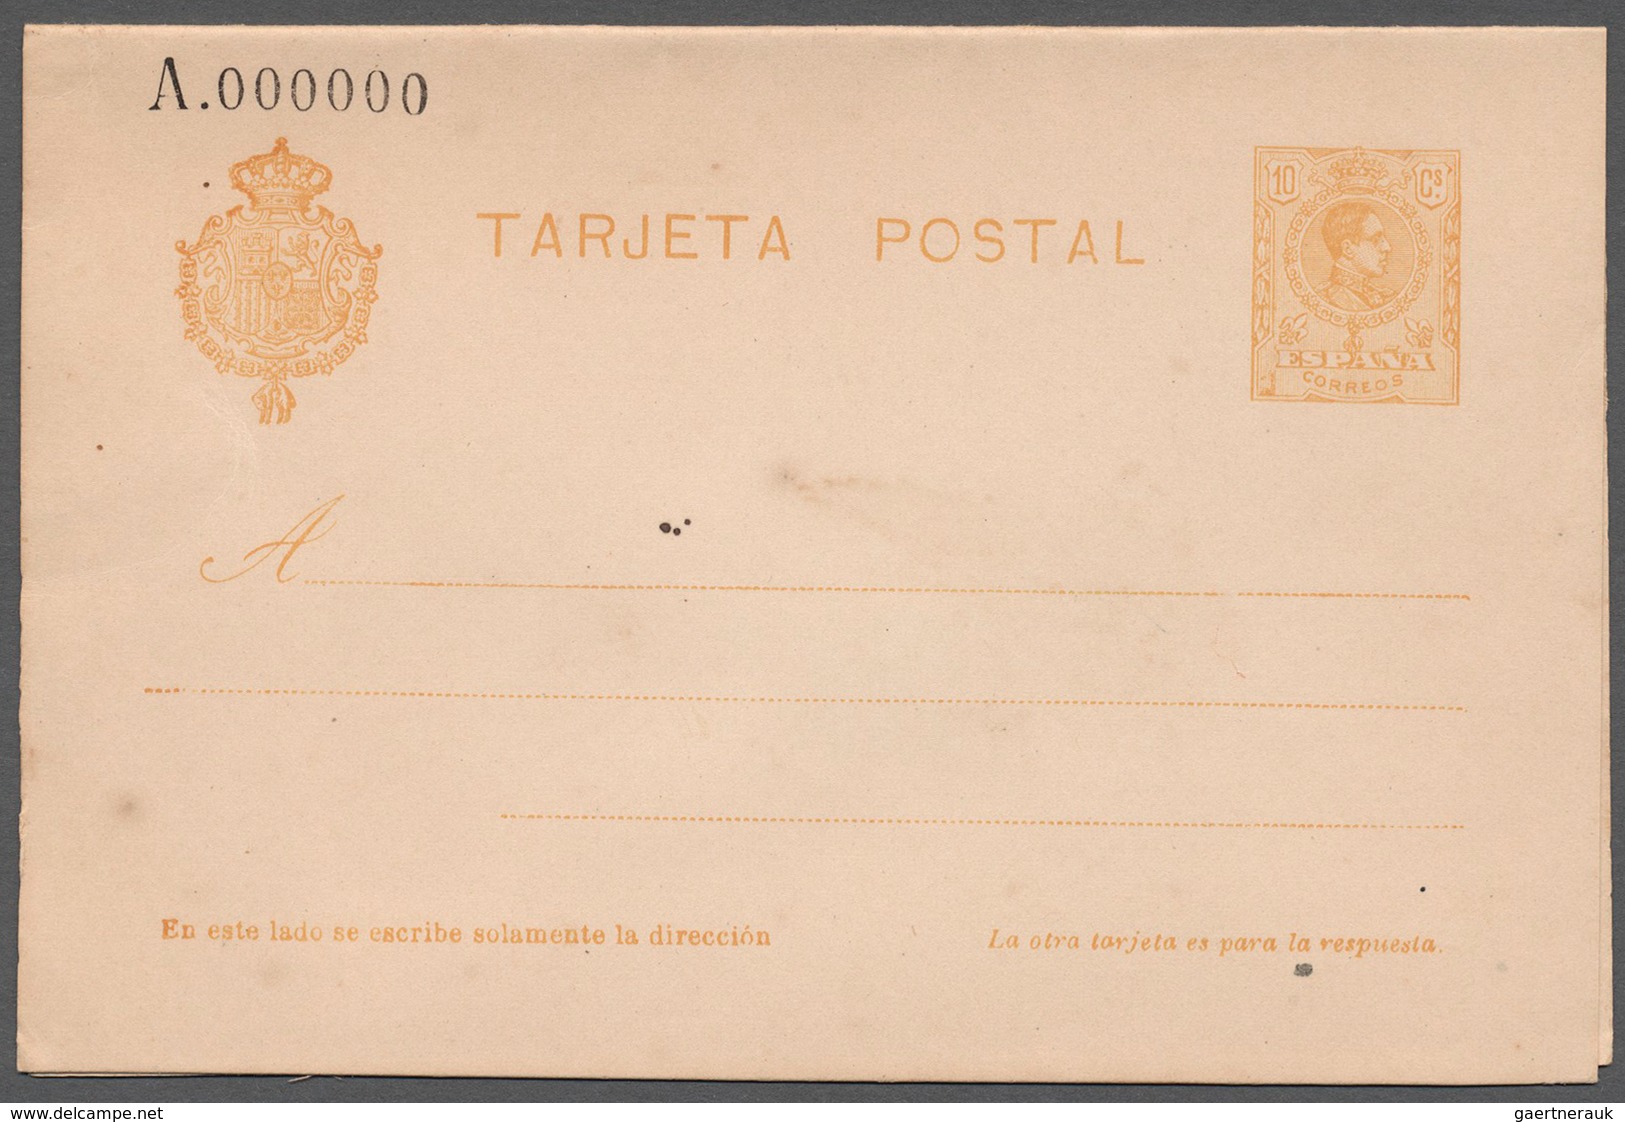 Spanien - Ganzsachen: 1918, Alfons XIII, 15 C. Yellow, Unissued Double Card "A.000000", Unused. ÷ 19 - 1850-1931